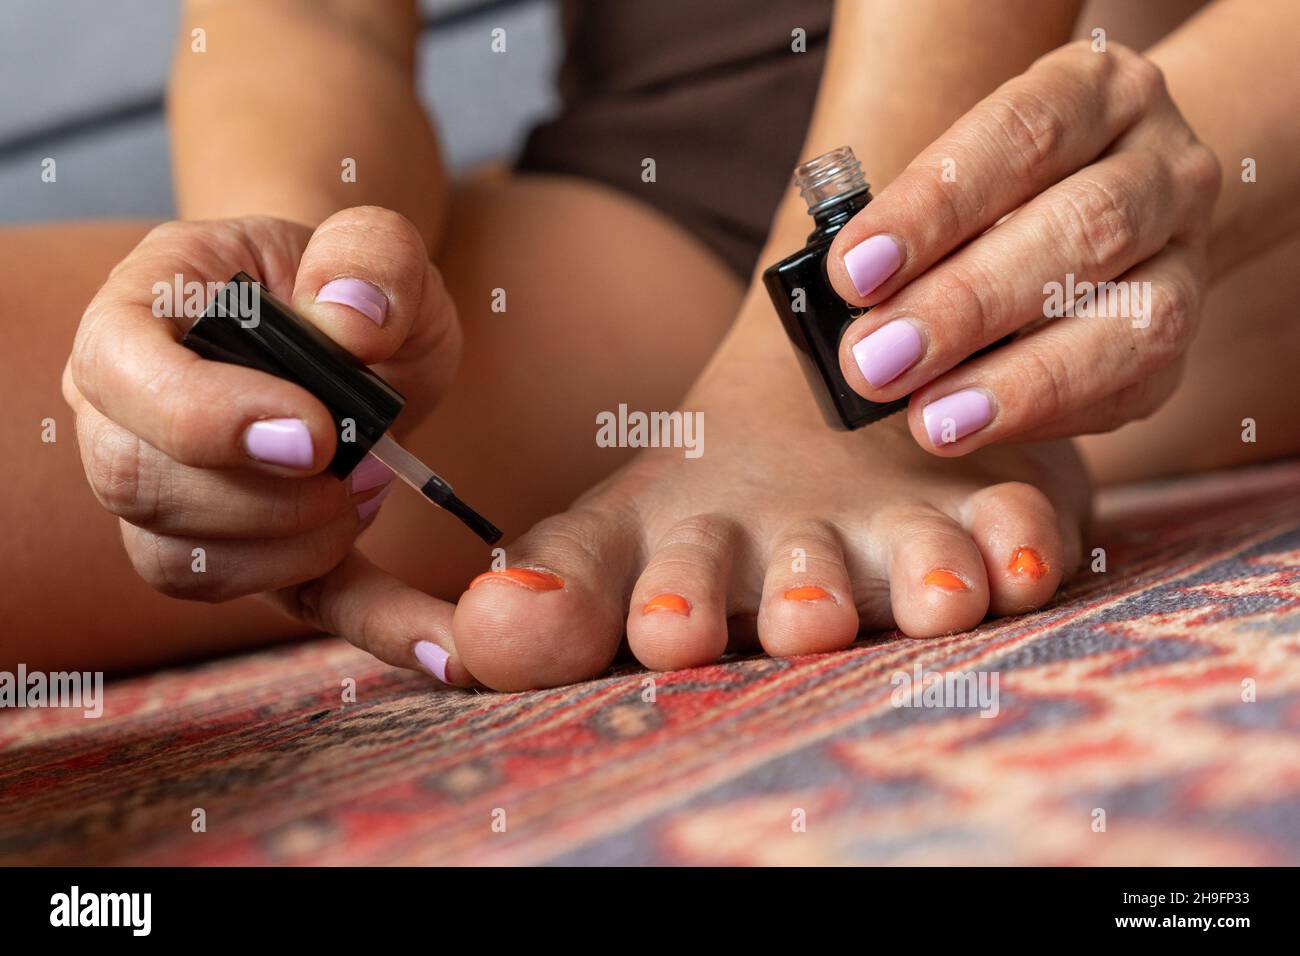 Woman with ugly feet painting her toenails with orange nail polish Stock Photo